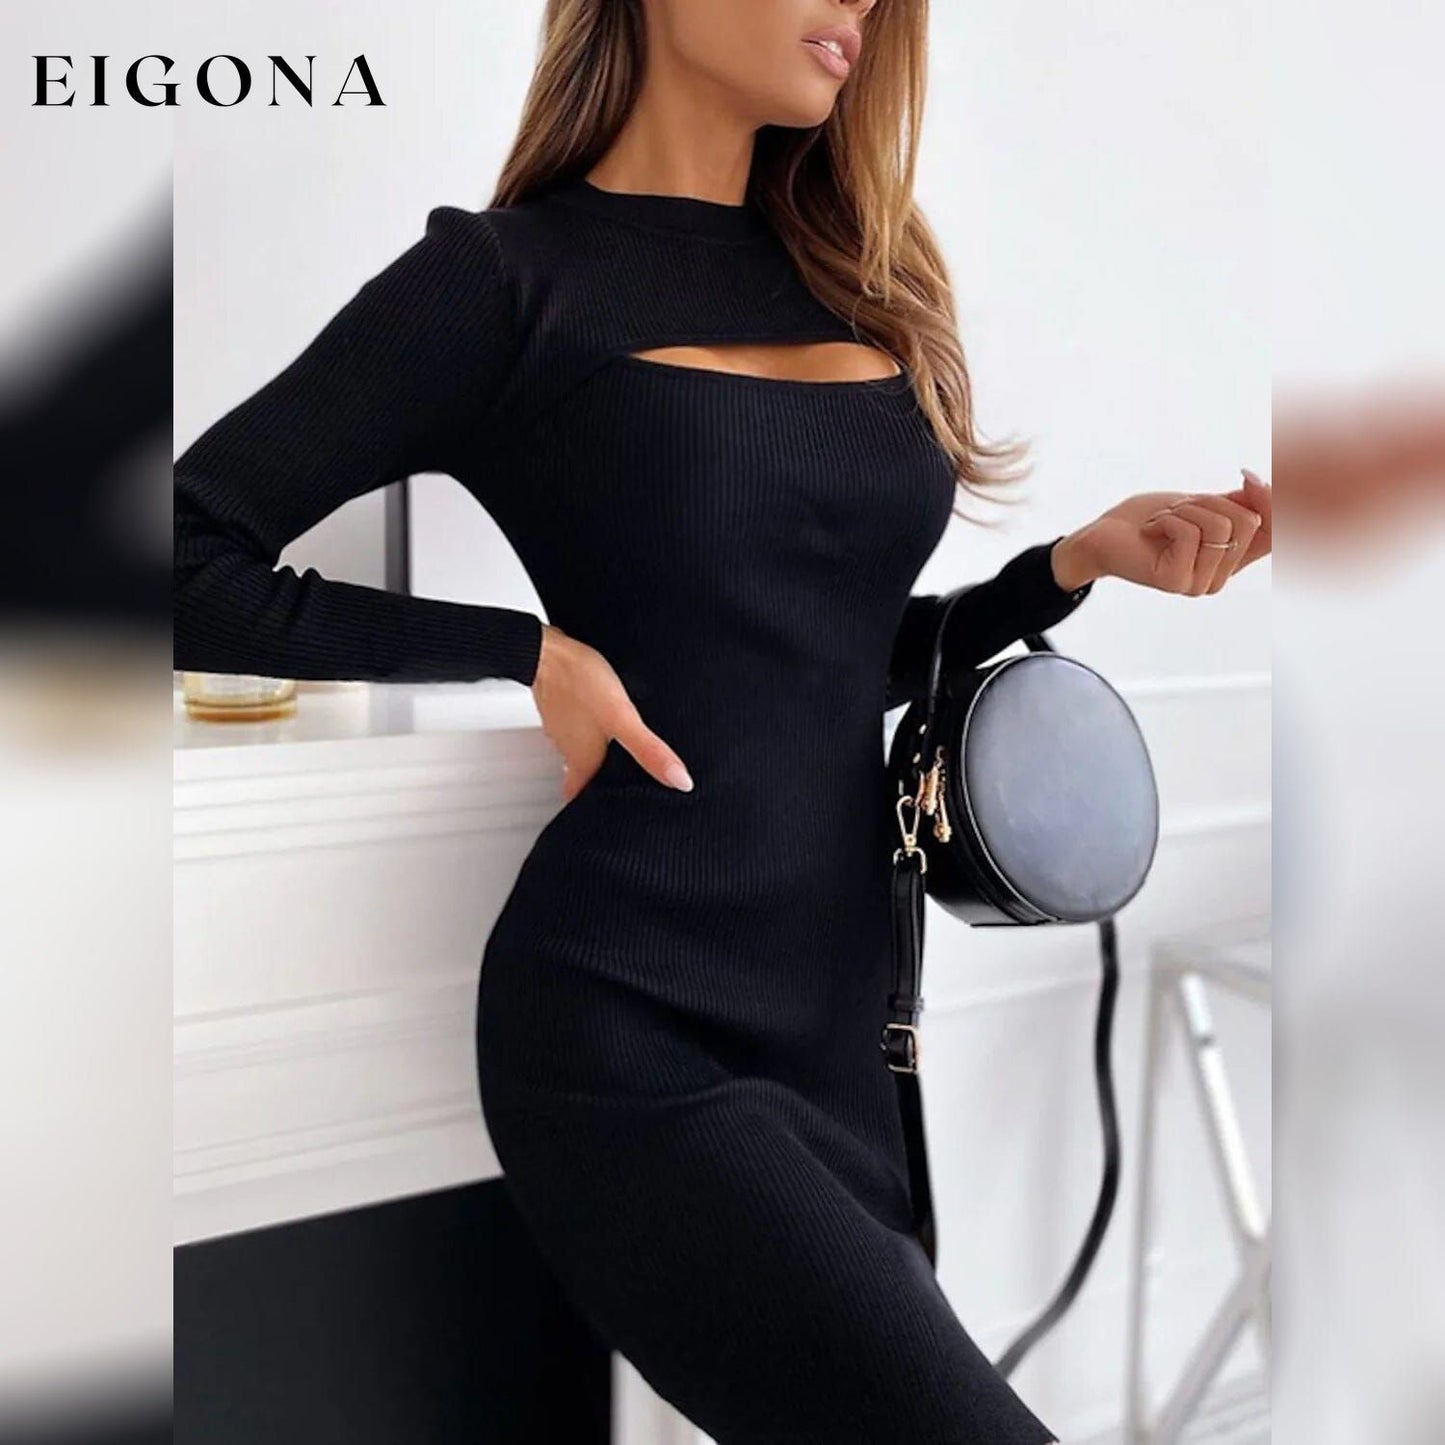 Women's Sweater Bodycon Long Sleeve Turtleneck Dress Black __stock:200 casual dresses clothes dresses refund_fee:1200